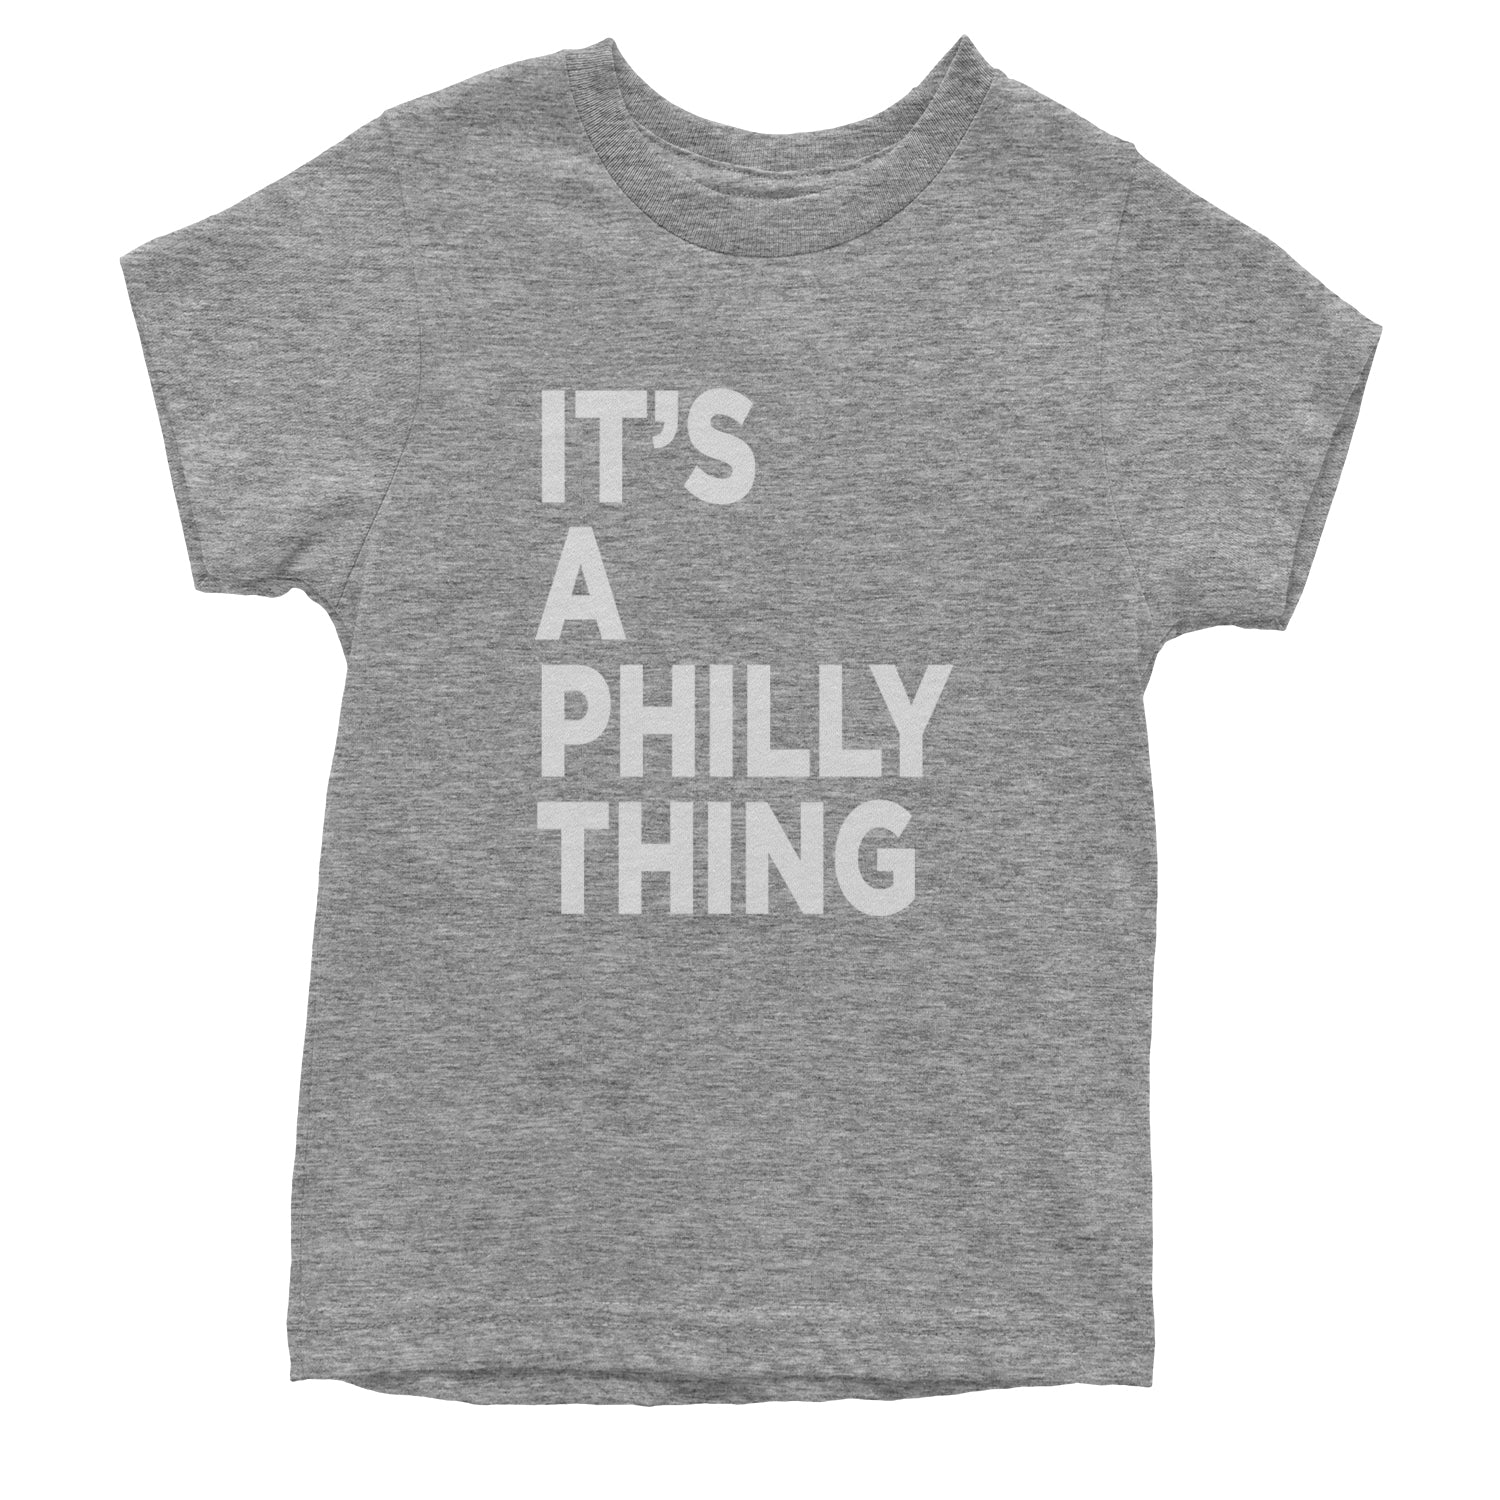 PHILLY It's A Philly Thing Youth T-shirt baseball, dilly, filly, football, jawn, morgan, Philadelphia, philli by Expression Tees